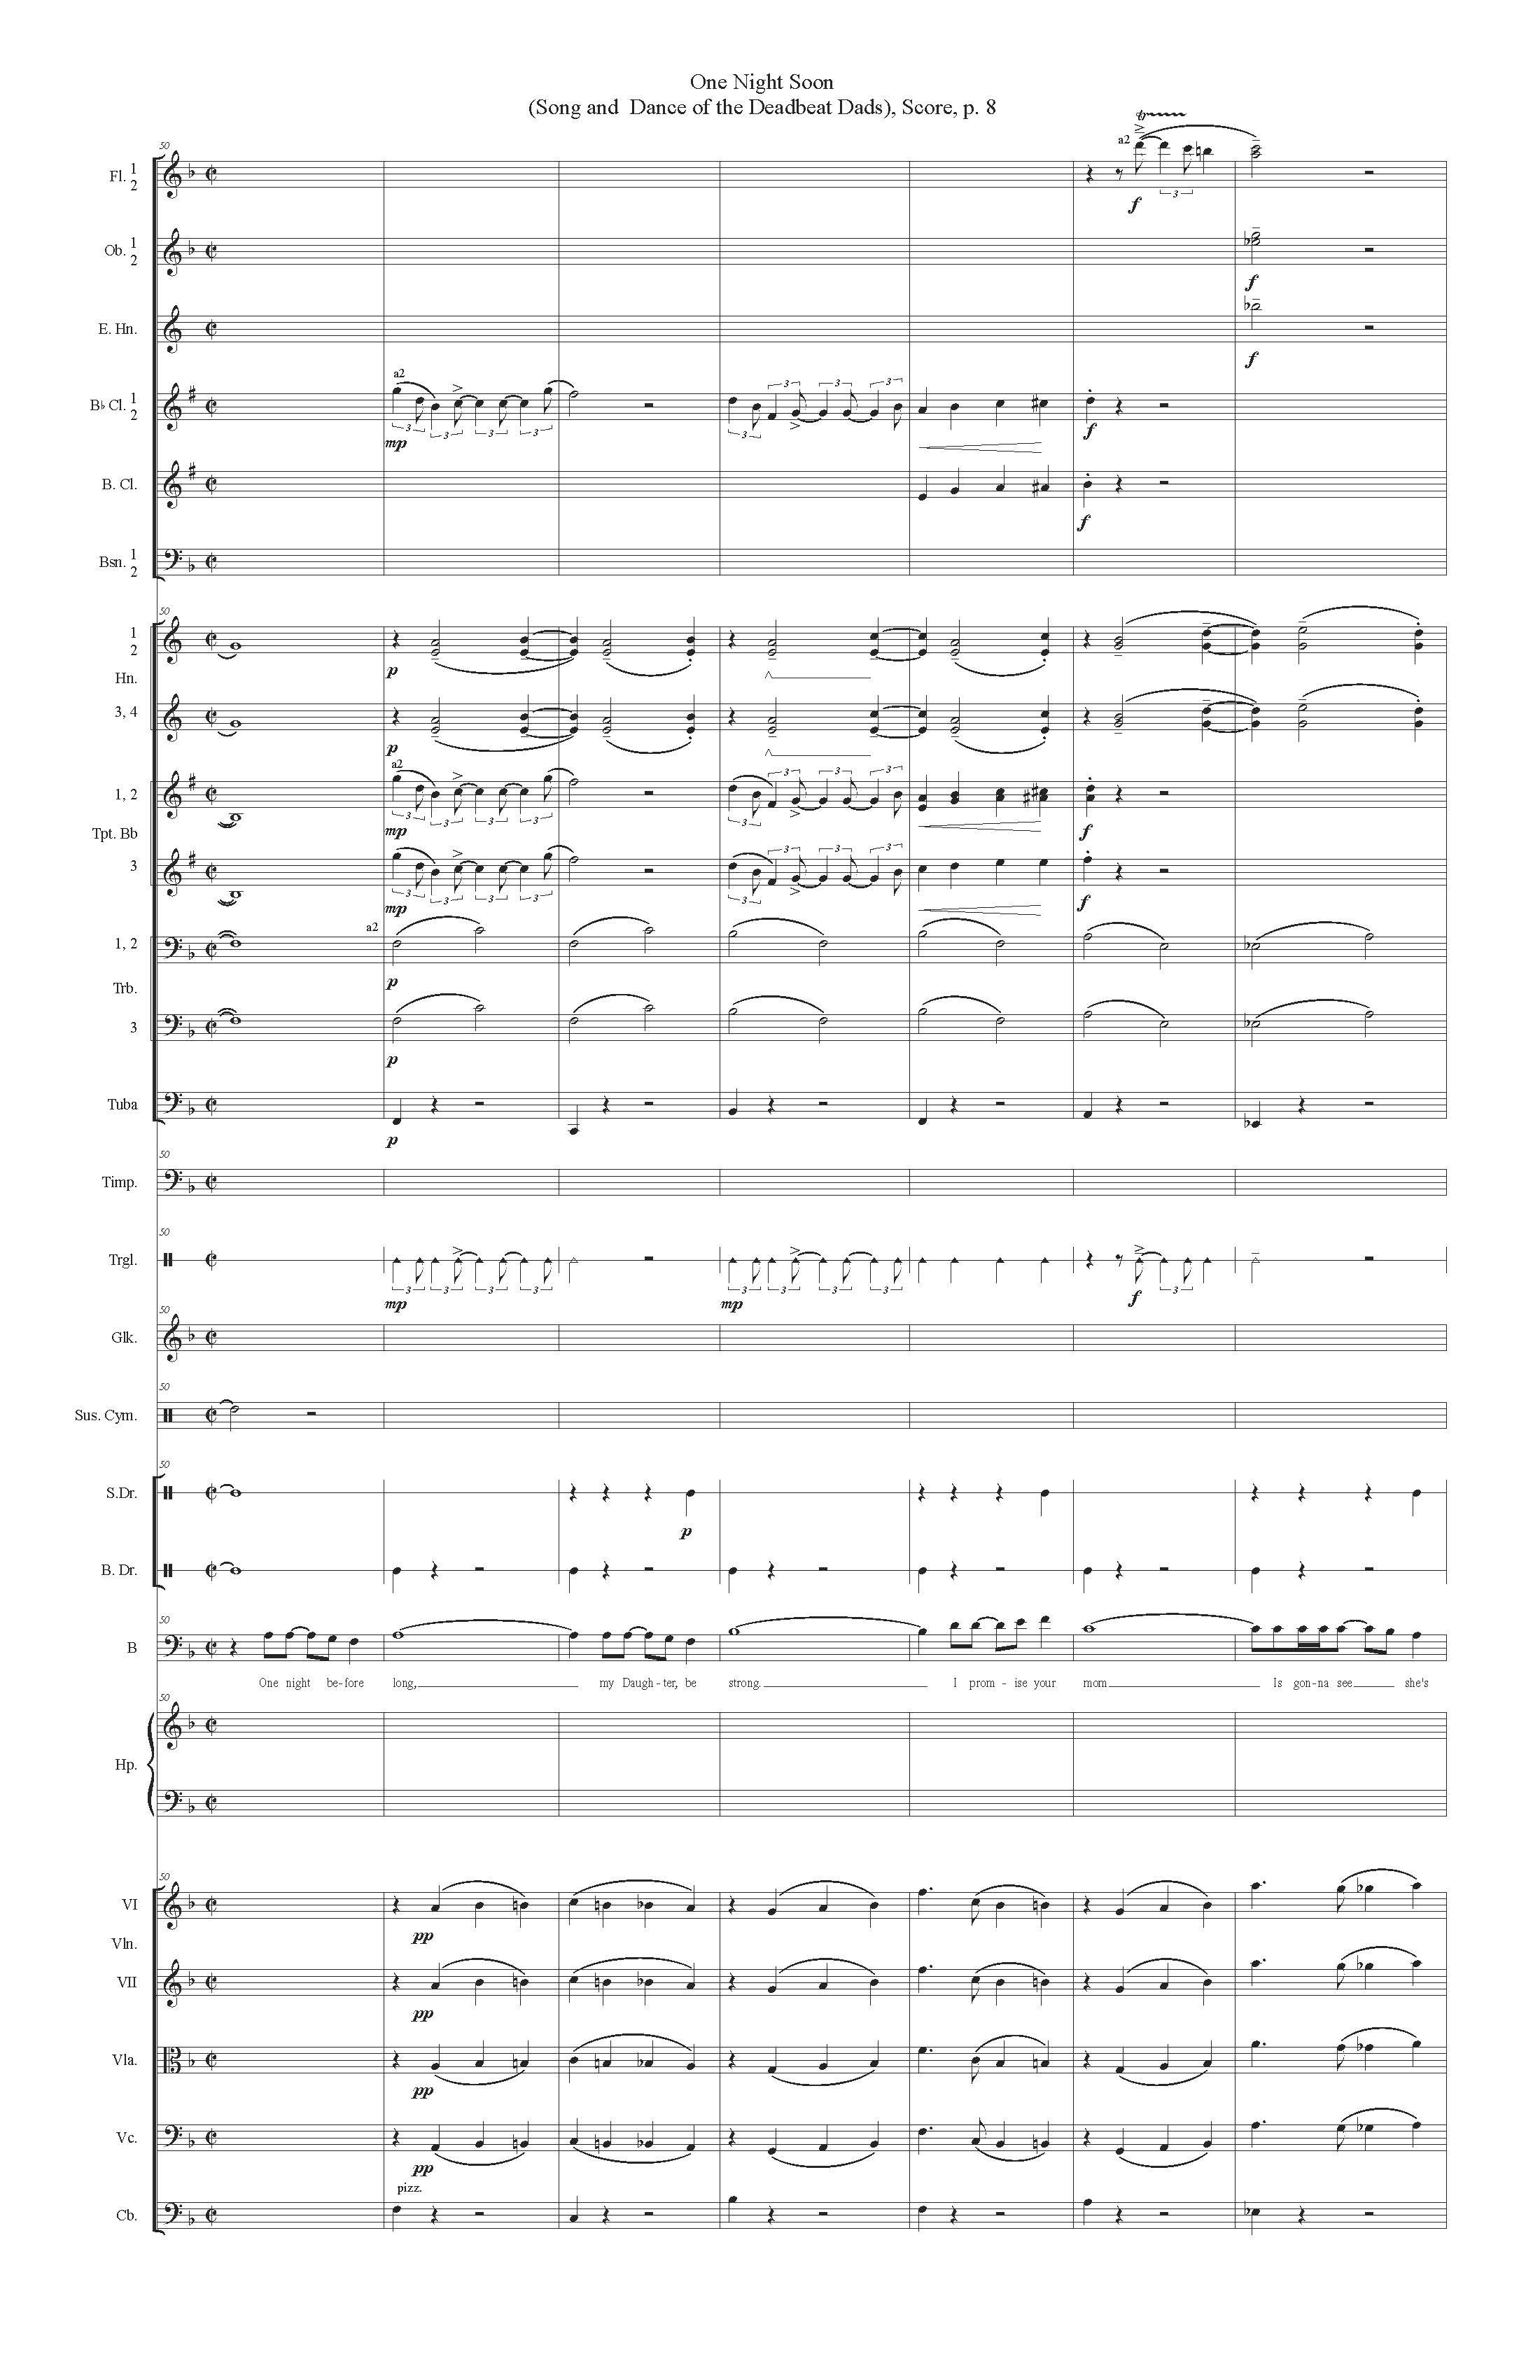 ONE NIGHT SOON ORCH - Score_Page_08.jpg